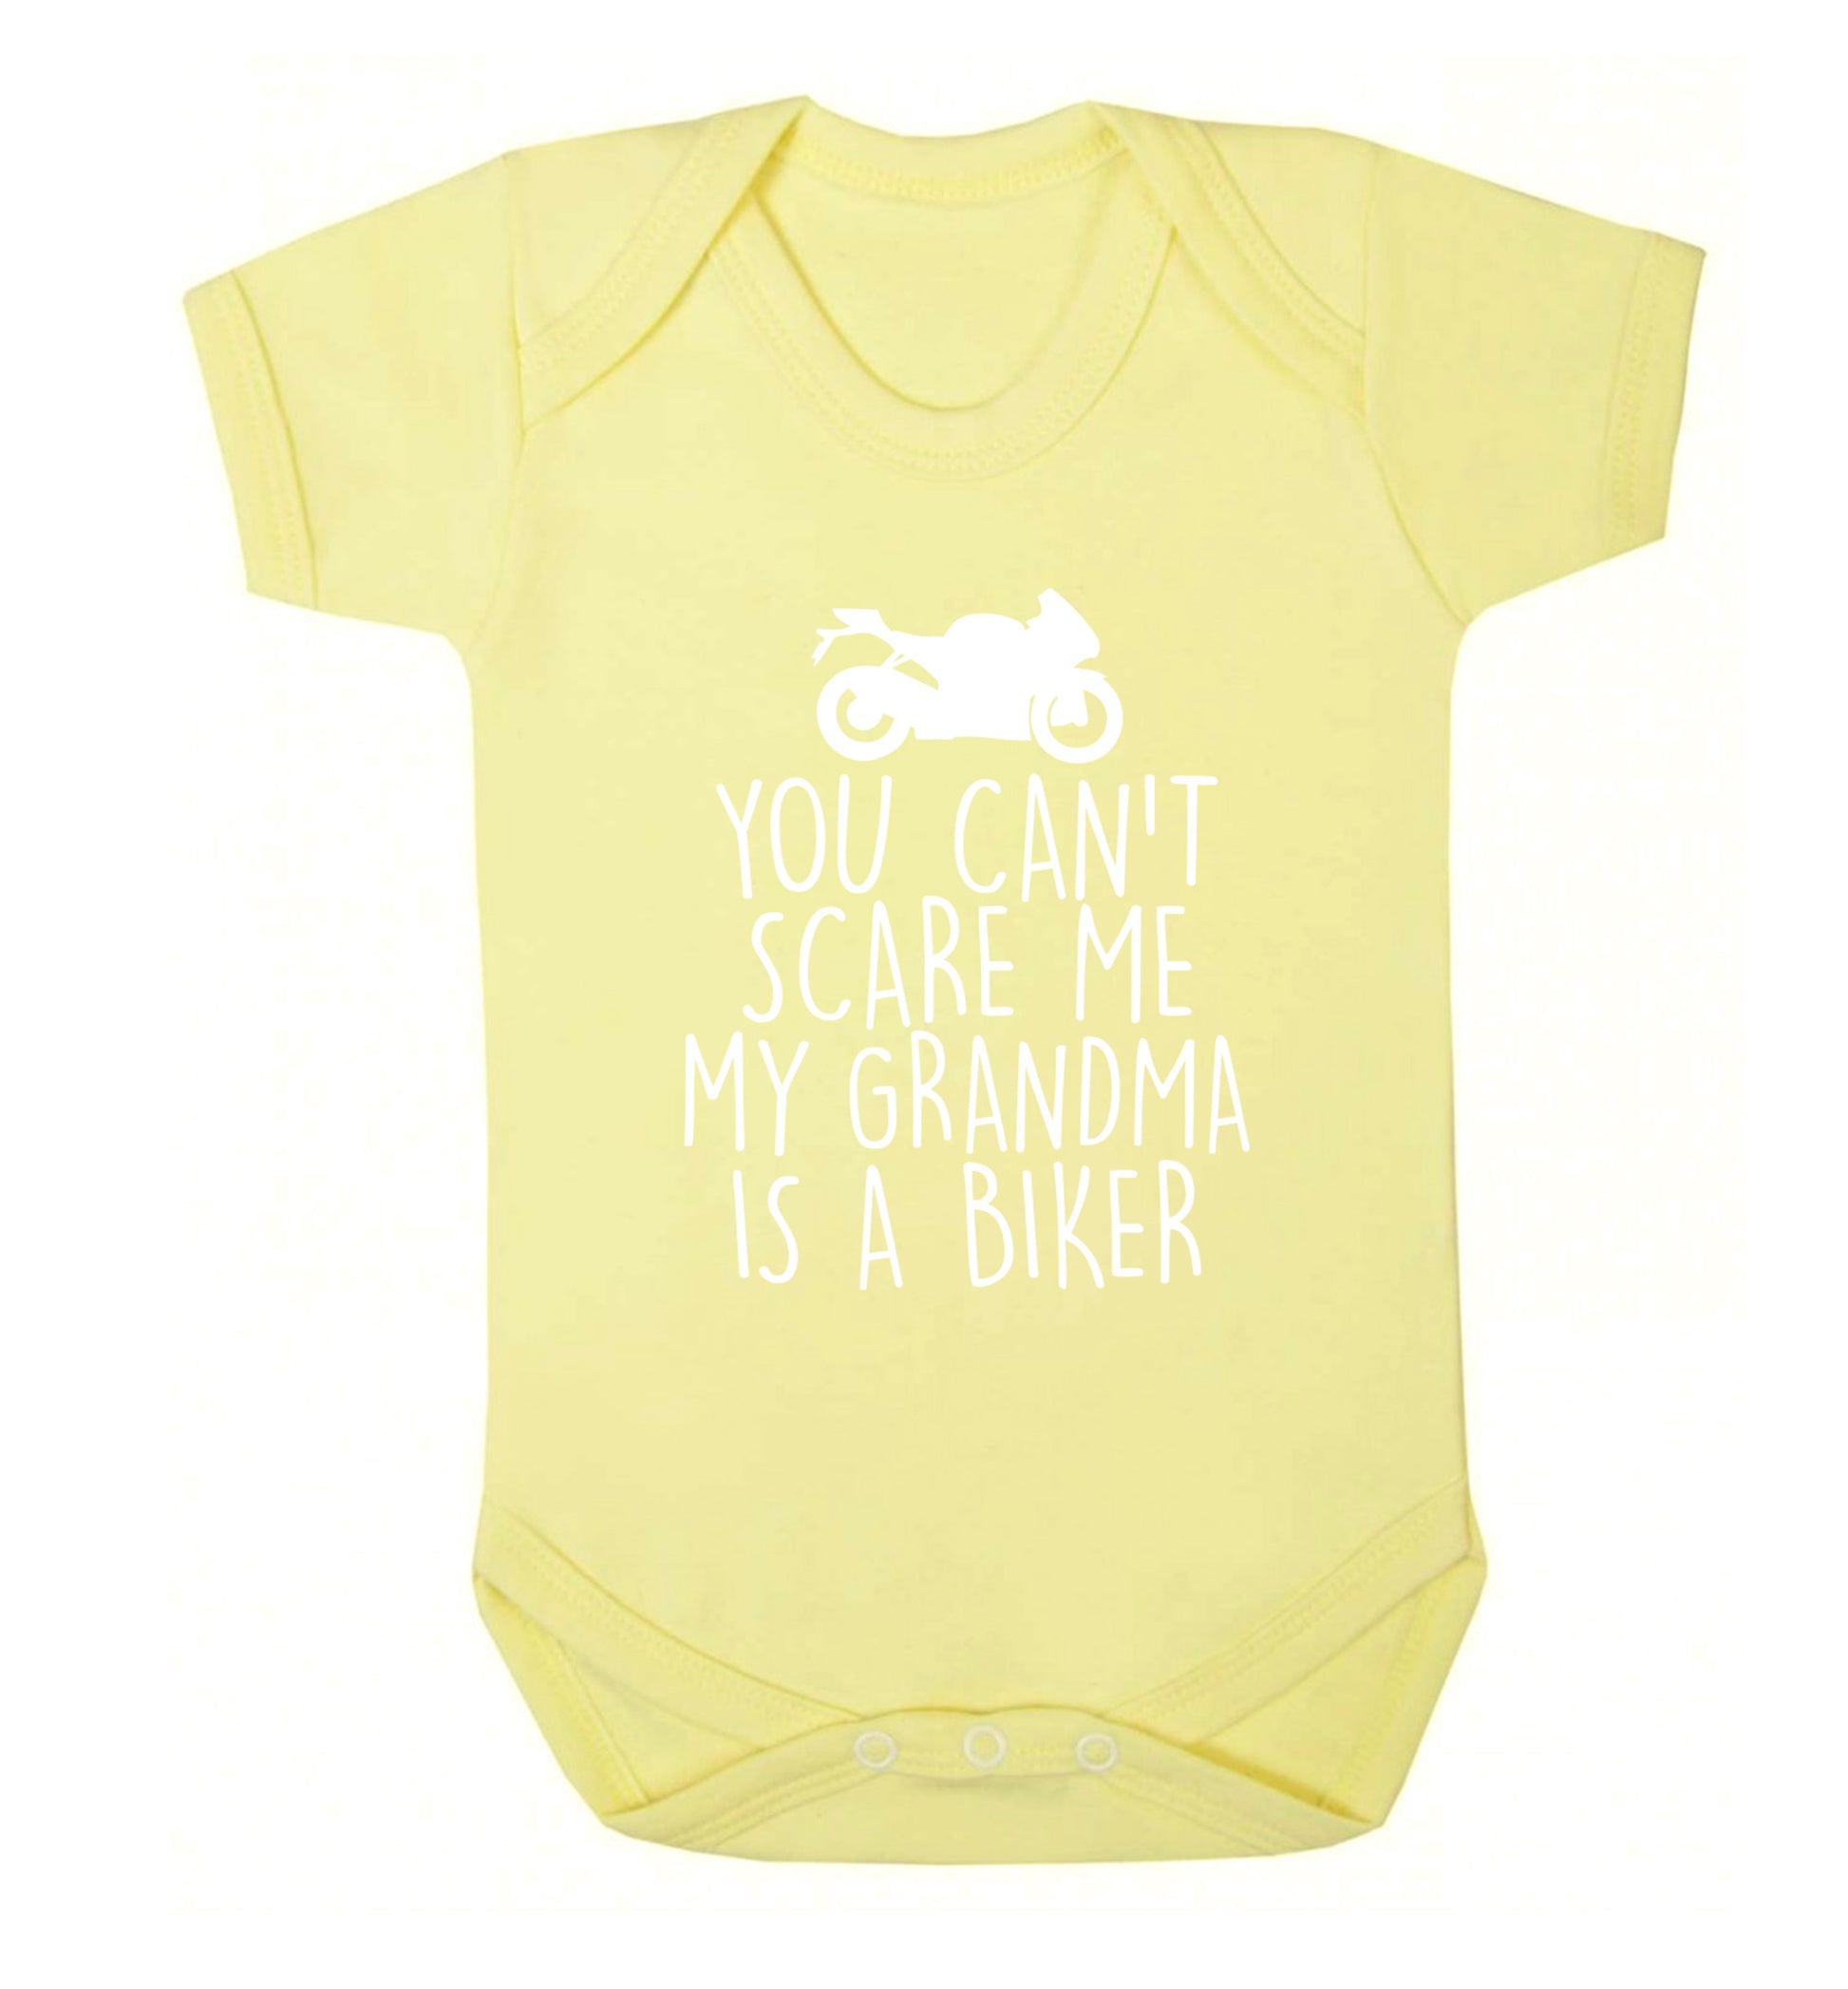 You can't scare me my grandma is a biker Baby Vest pale yellow 18-24 months